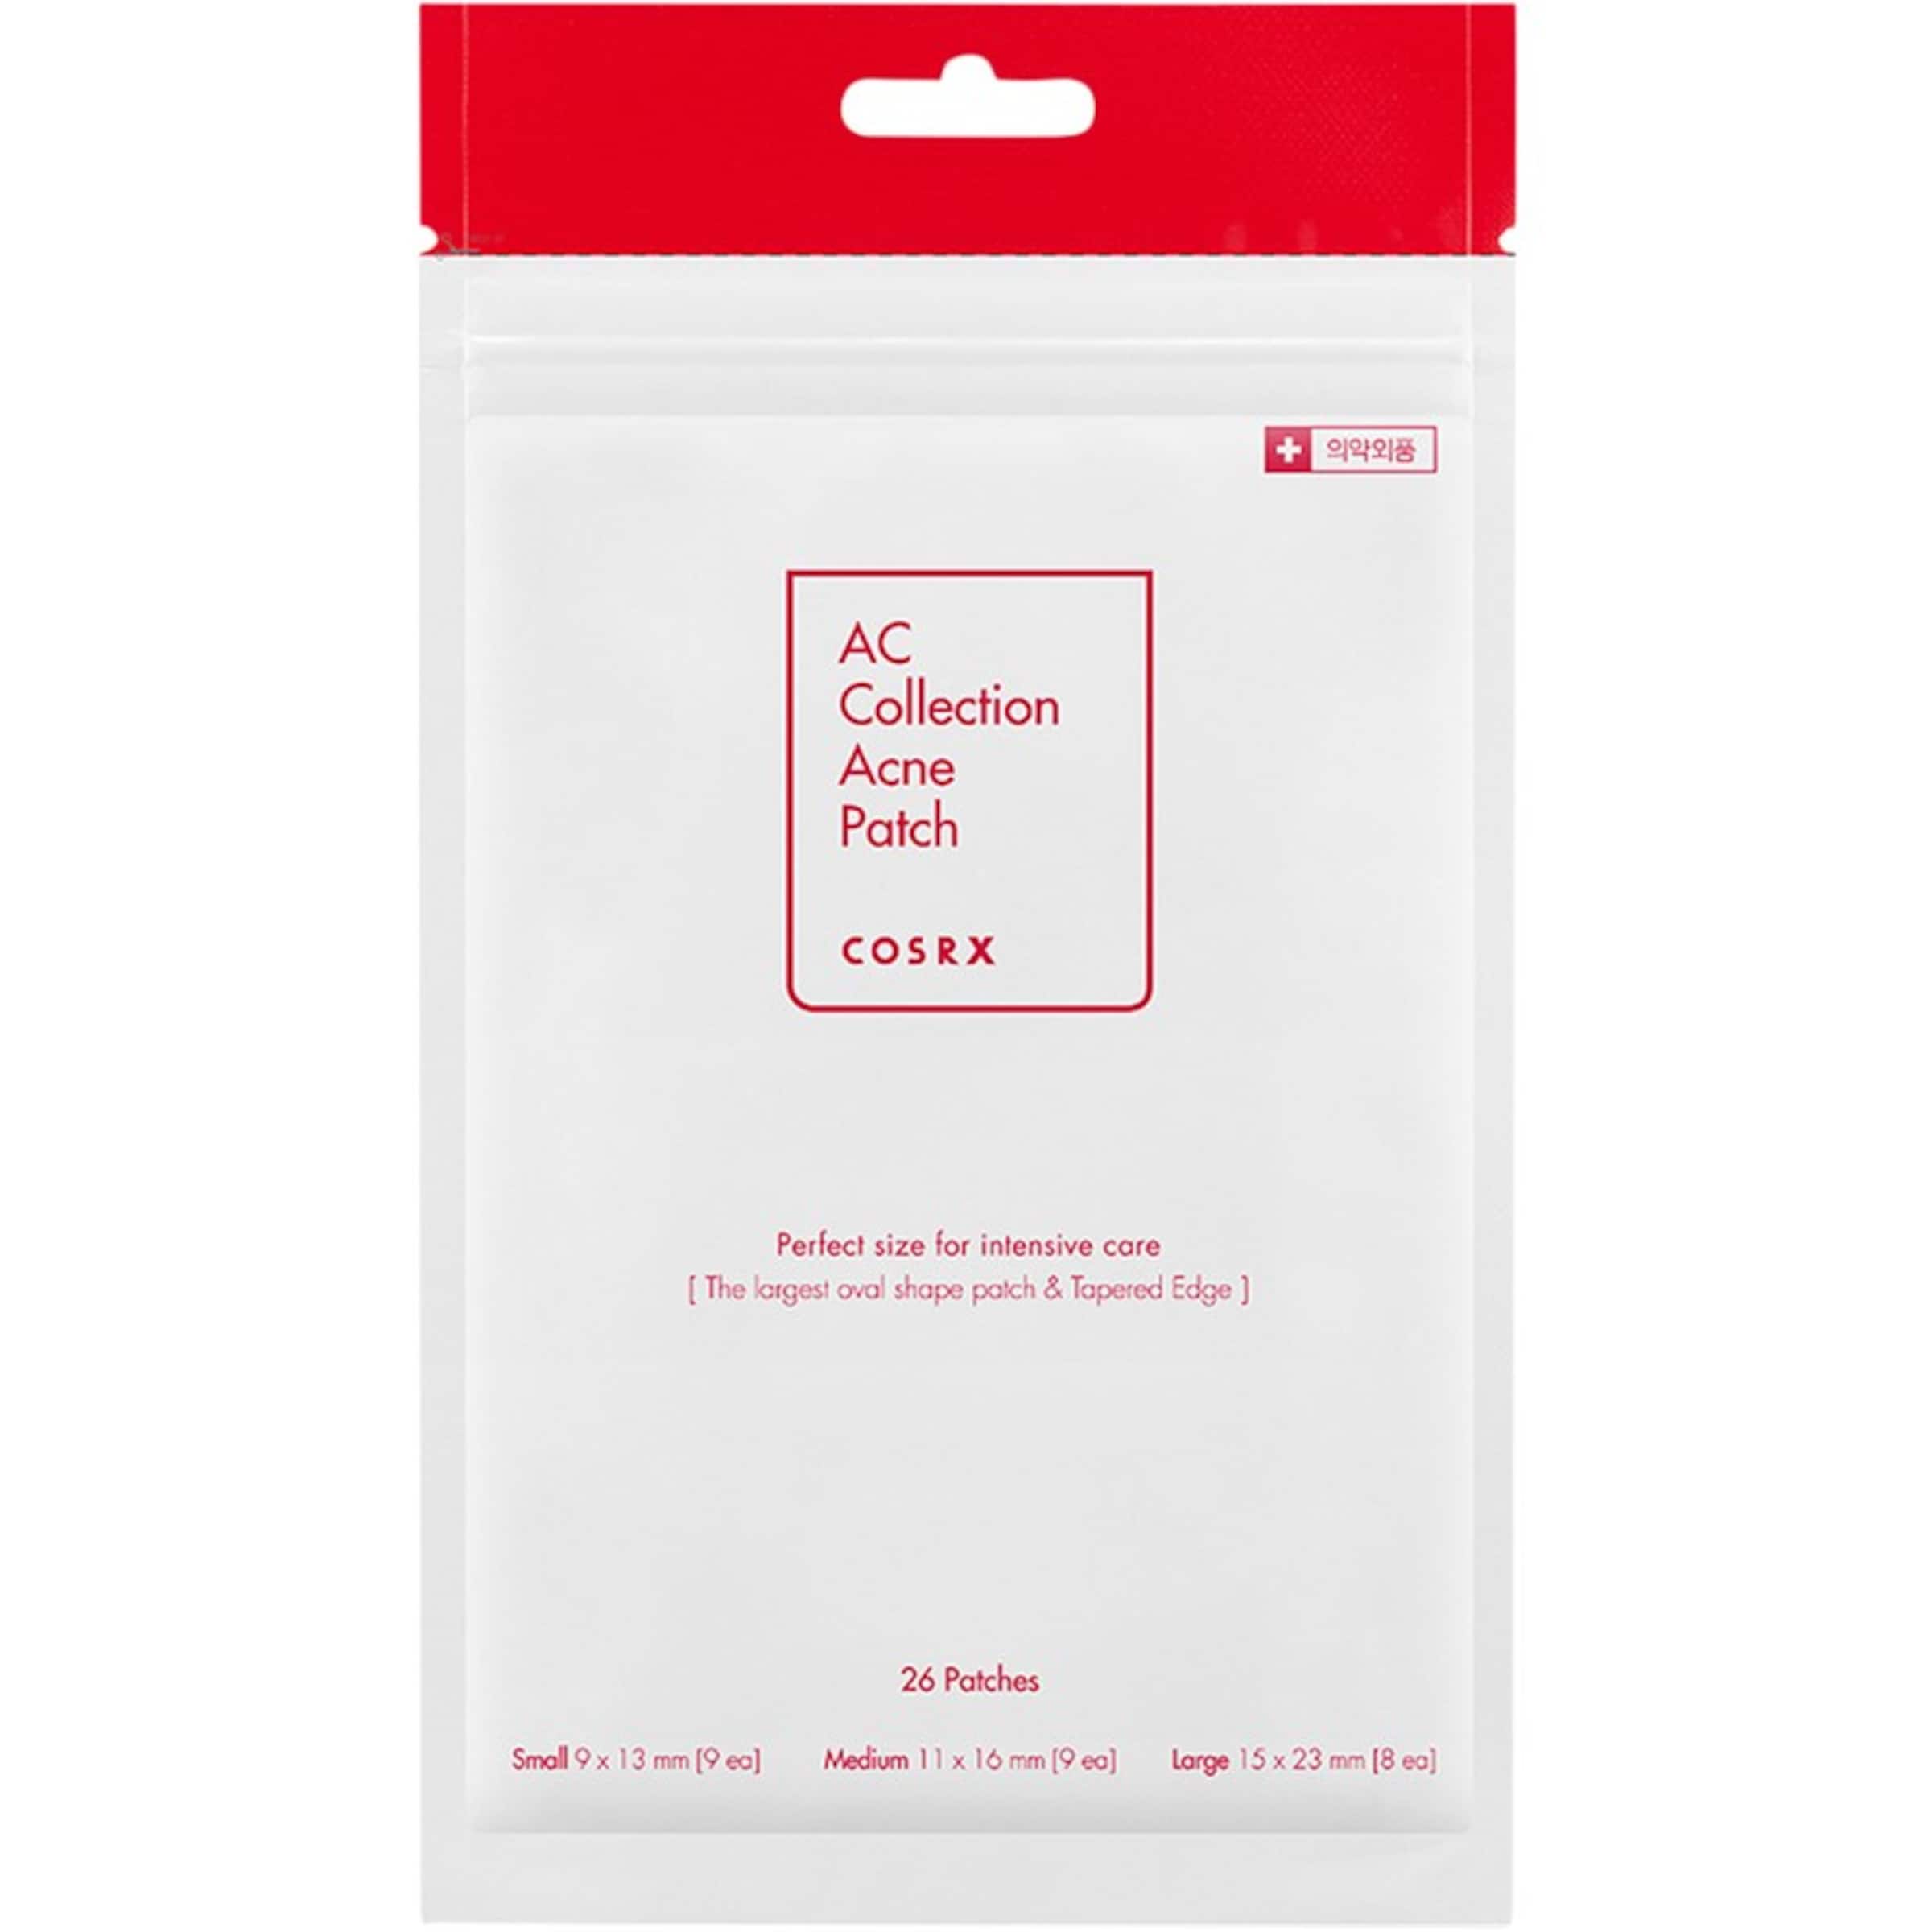 COSRX Gesichtsmaske AC Collection Acne Patch in 